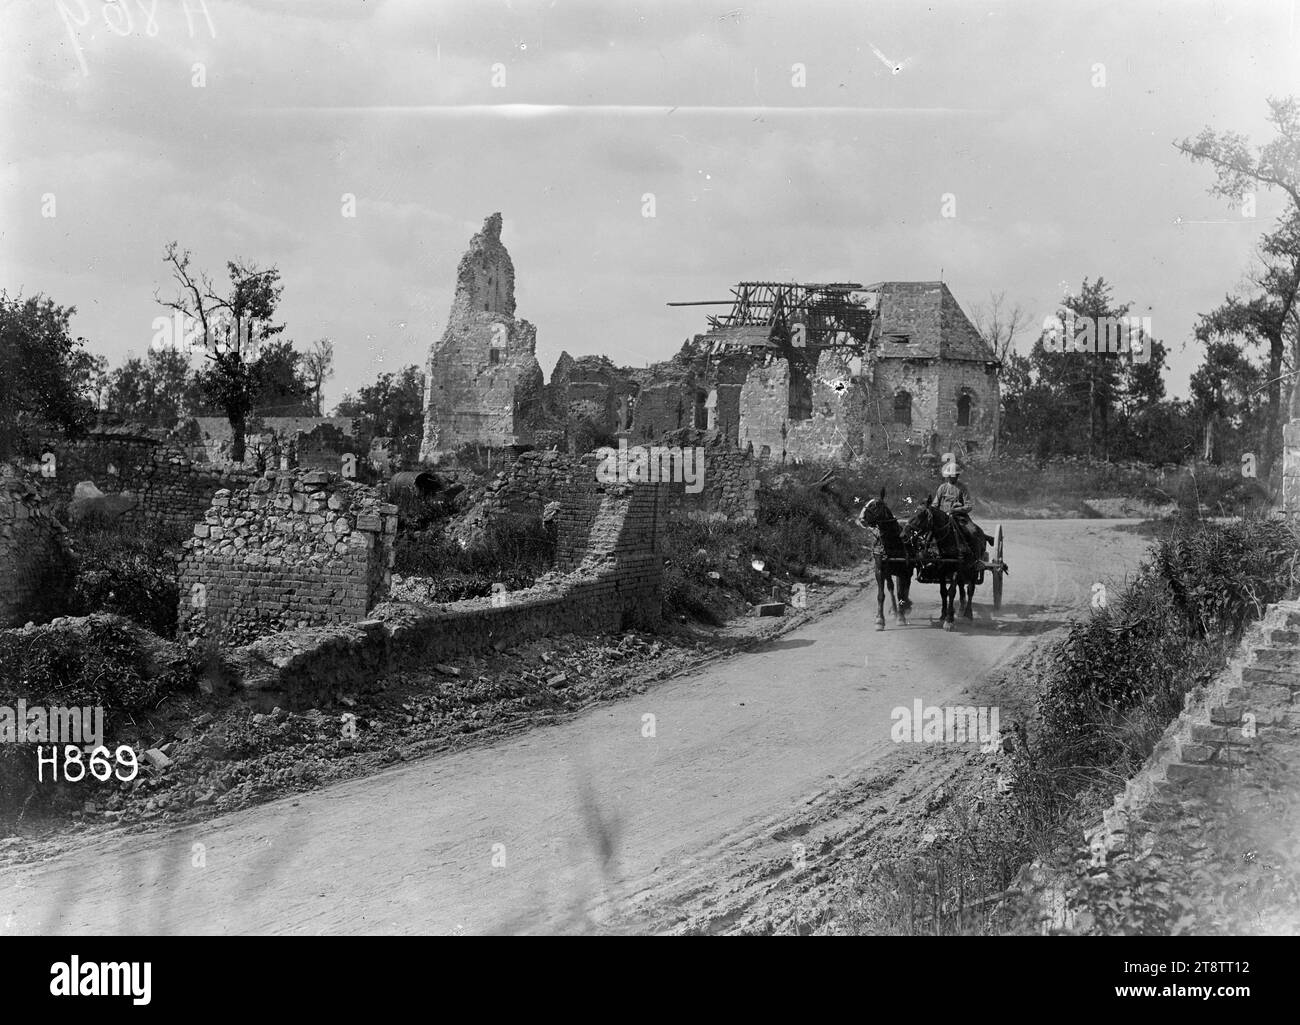 A badly shelled, scarred French village just behind the lines, World War I, A badly shelled and scarred French village (unidentified) just behind the lines in World War I. View looking over a road at the ruins of brick buildings and houses. A soldier drives a cart down the road. Photograph taken 11 August 1918 Stock Photo